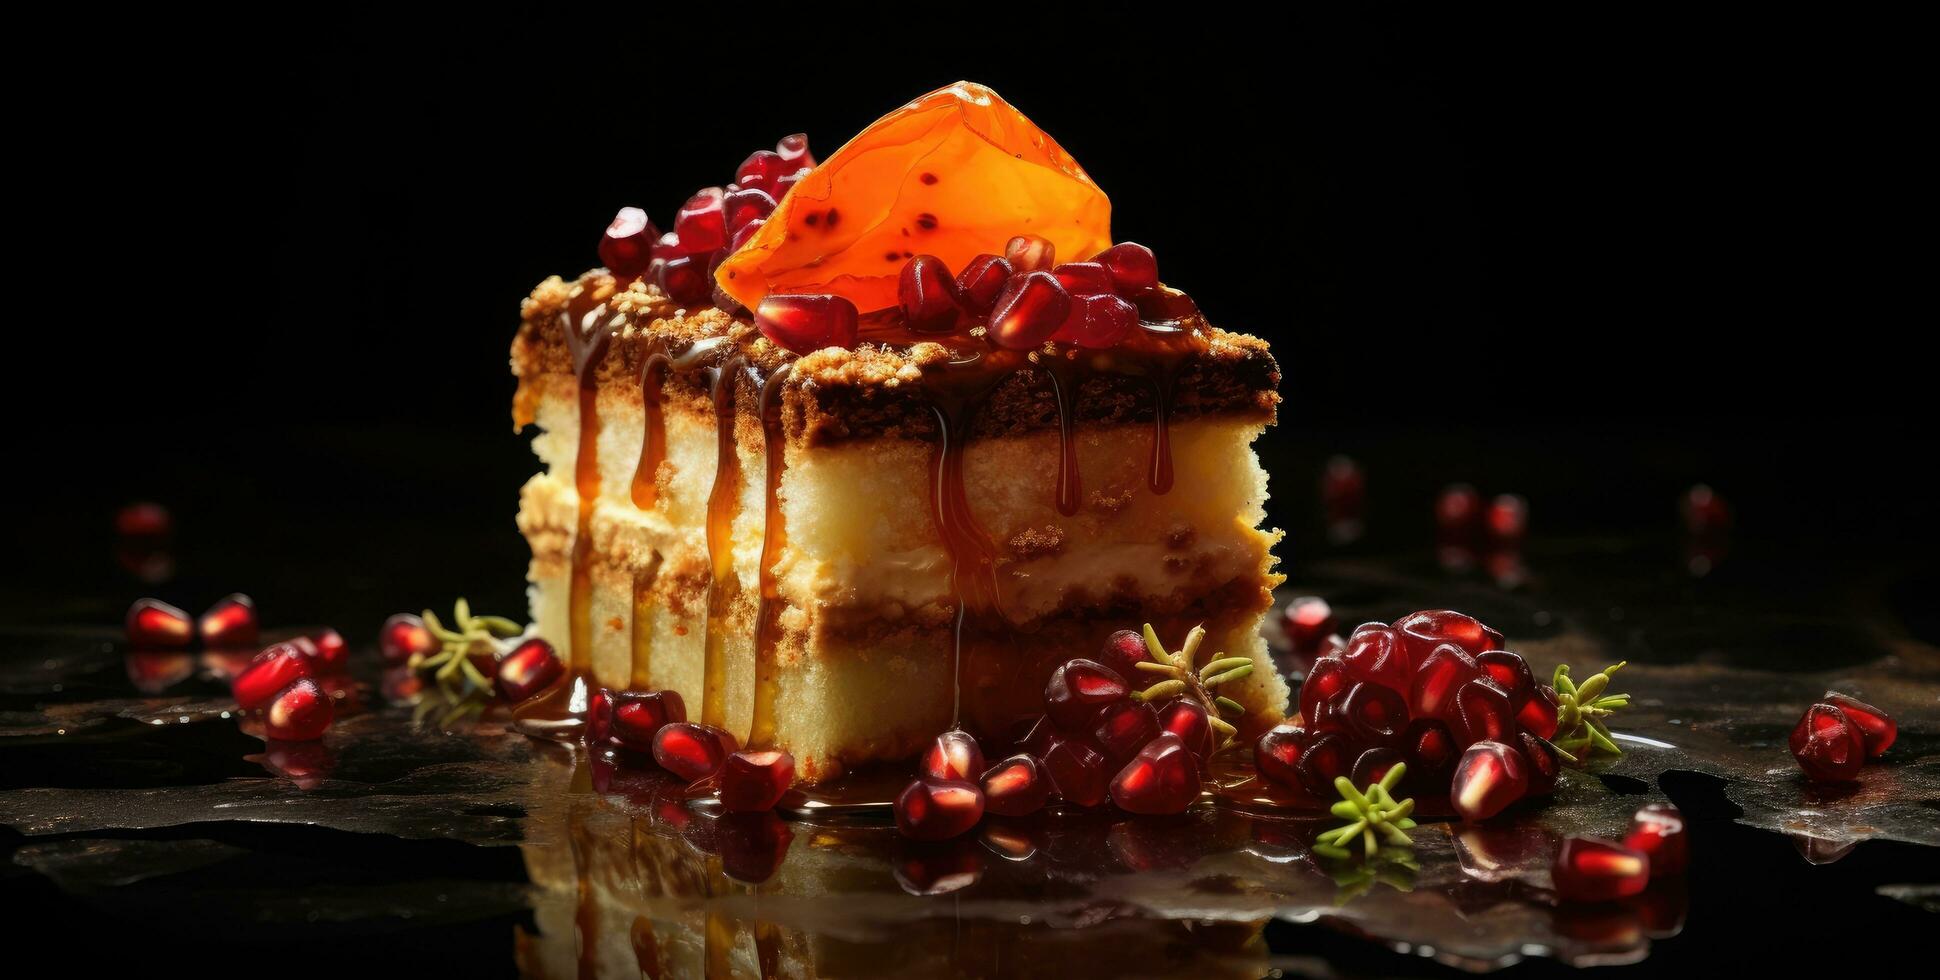 AI generated a piece of desert with pomegranate, almond sprinkled on top photo